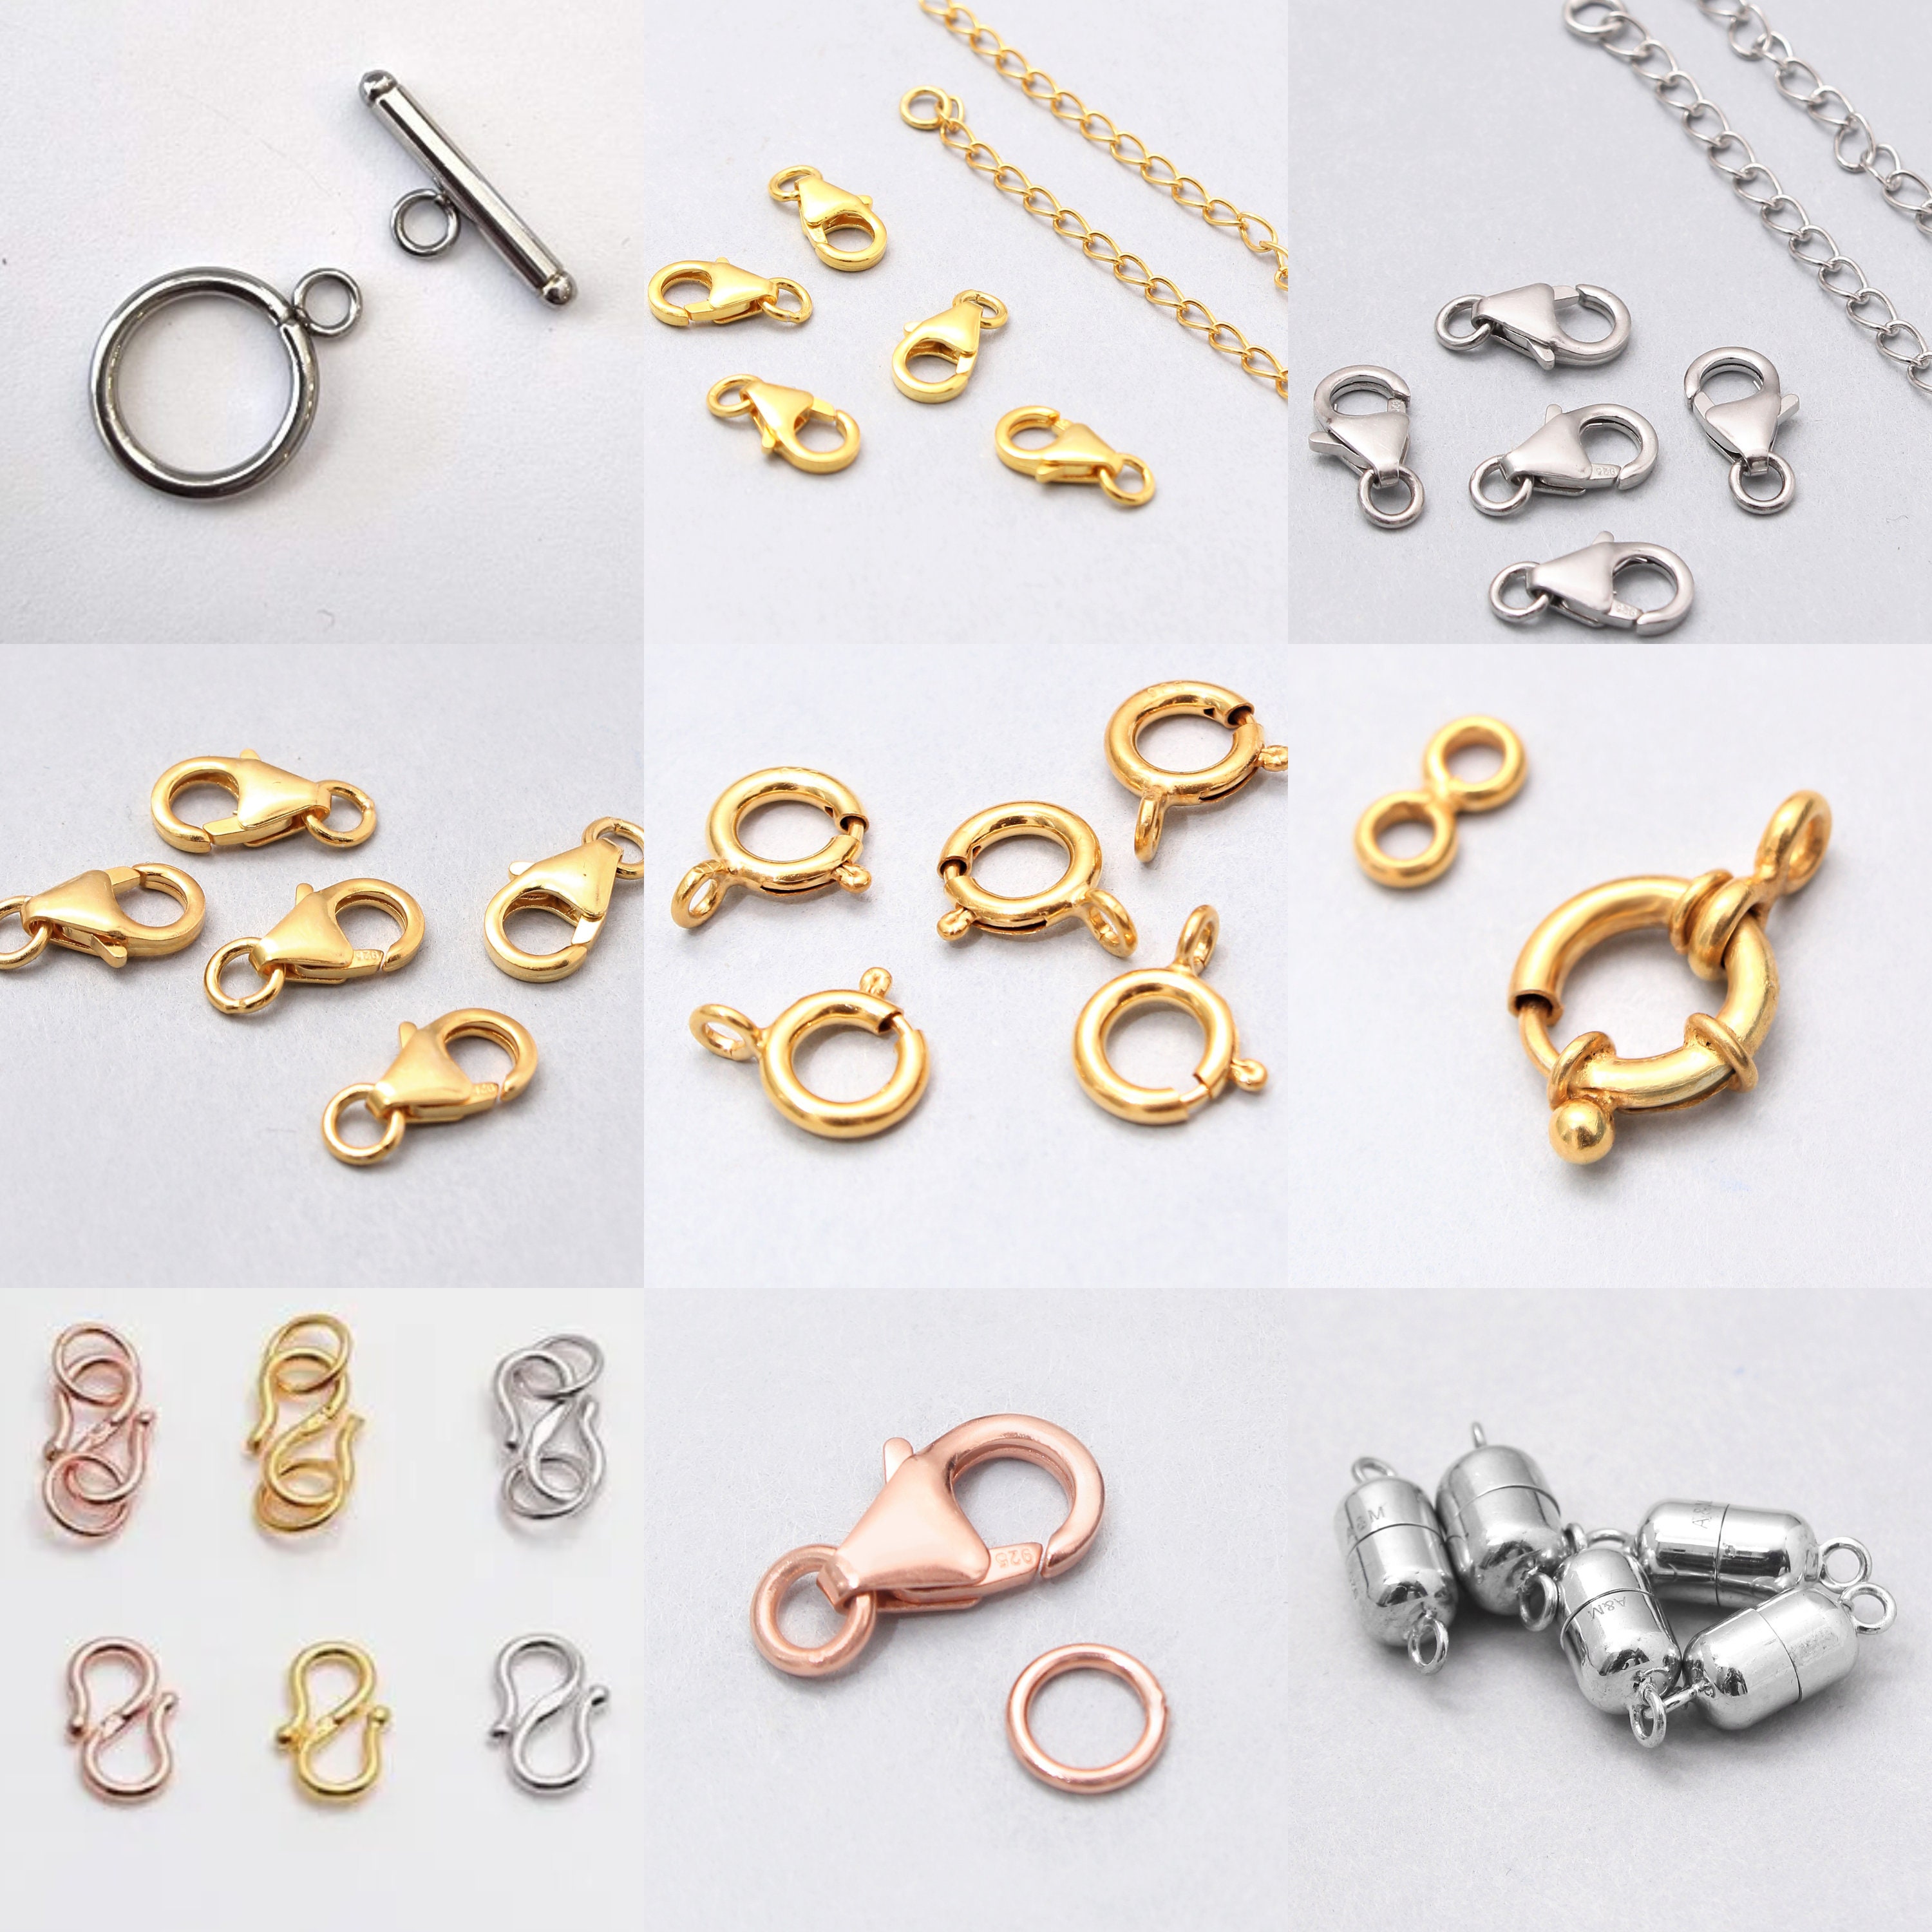 5PCs/6Pcs Accessories Silver Gold Extender DIY Connector Hook Necklace  Bracelet Connector Buckle Magnetic Clasps Jewelry Making Supplies